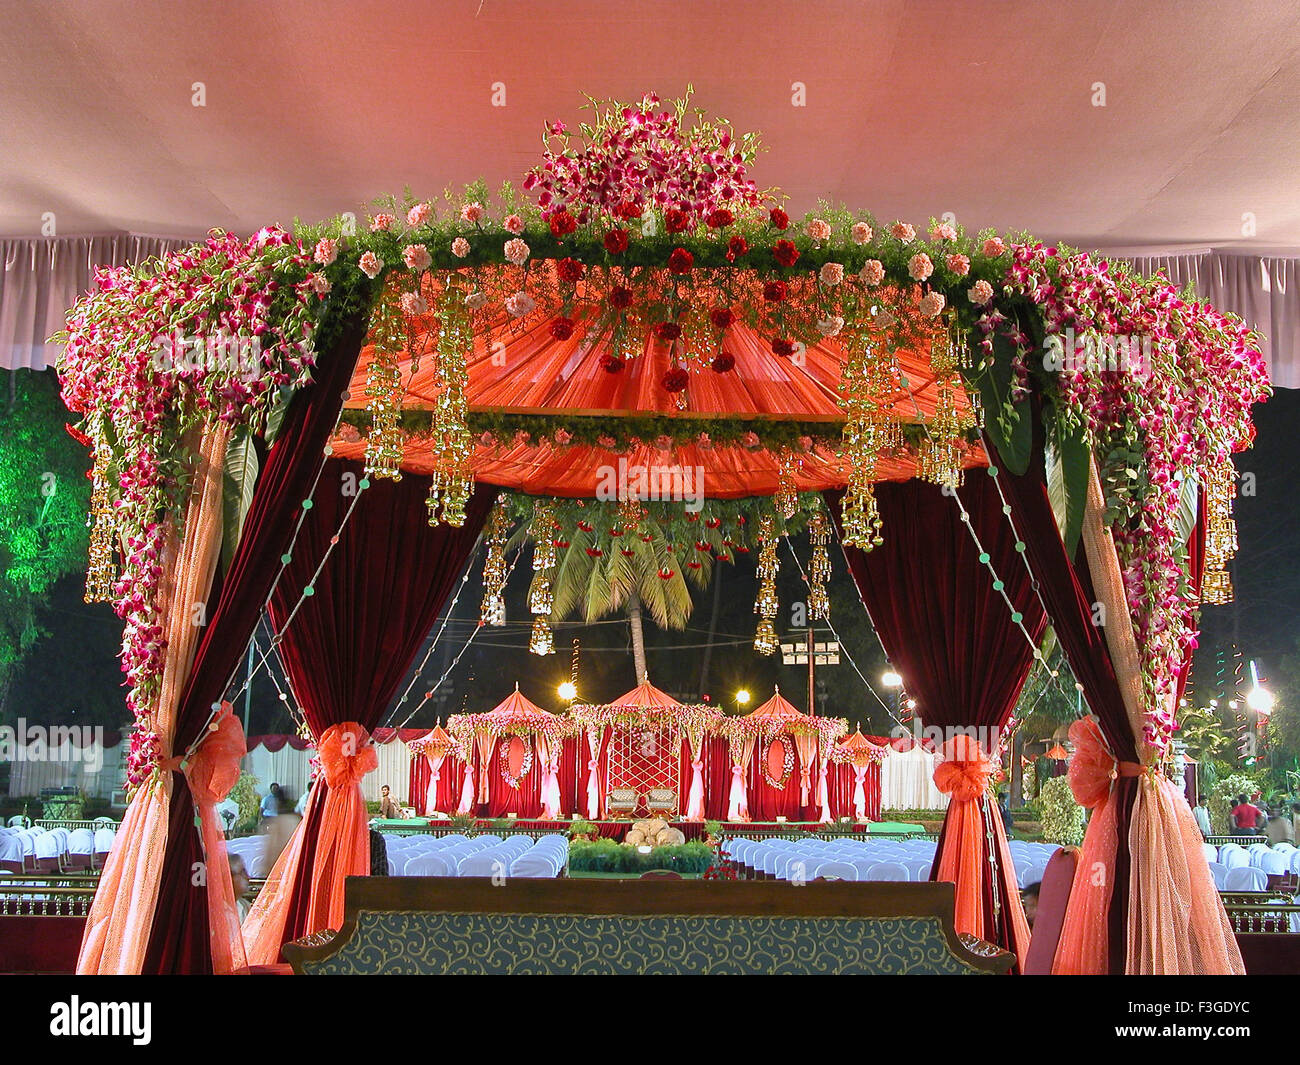 New] The 10 Best Home Decor (with Pictures) - Stage Decor #Trad wedding  #igbo… | Wedding design decoration, Traditional wedding decor, Outdoor wedding  decorations